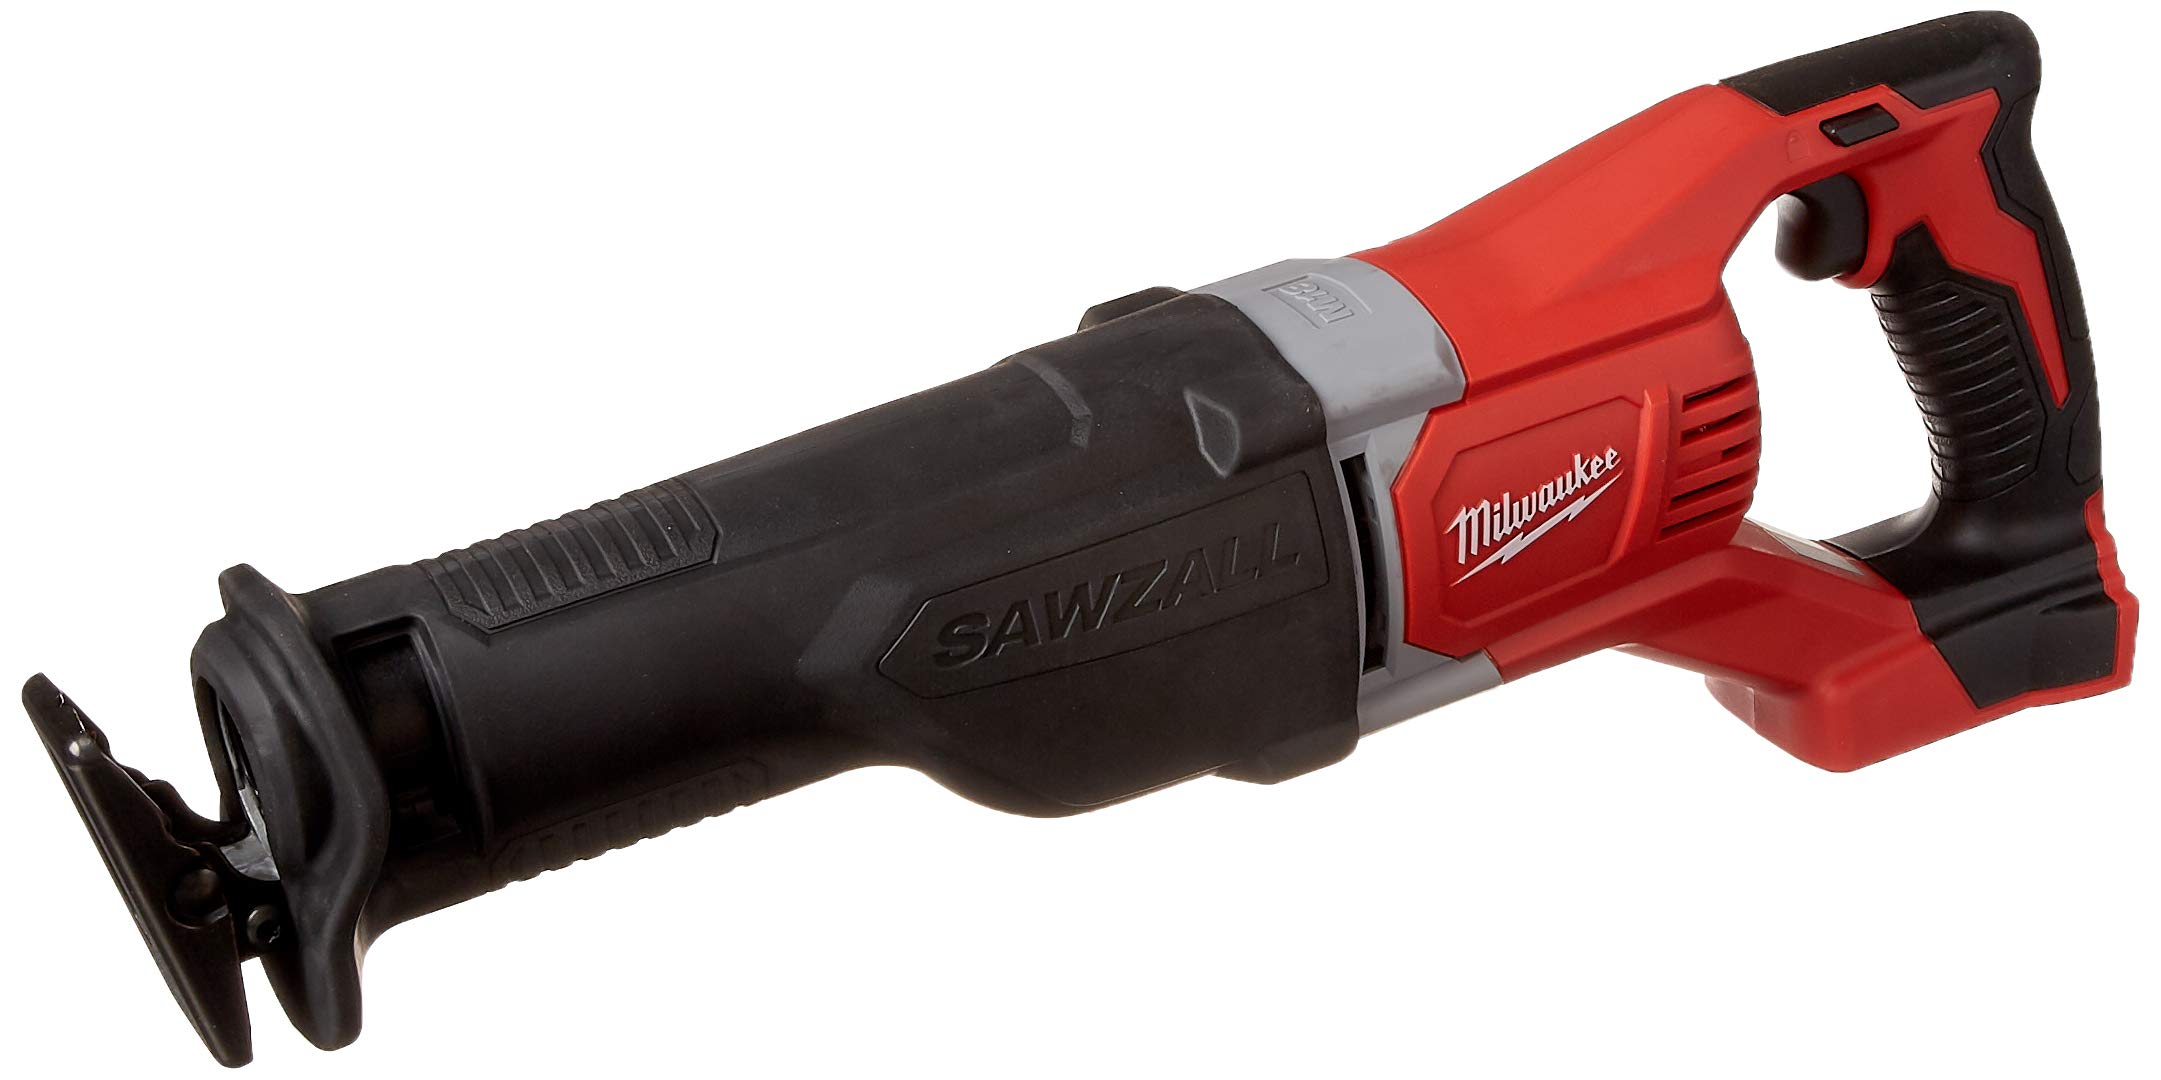 Milwaukee 2621-20 M18 18V Lithium Ion Cordless Sawzall 3,000RPM  Reciprocating Saw with Quik Lok Blade Clamp and All Metal Gearbox (Bare Tool) 